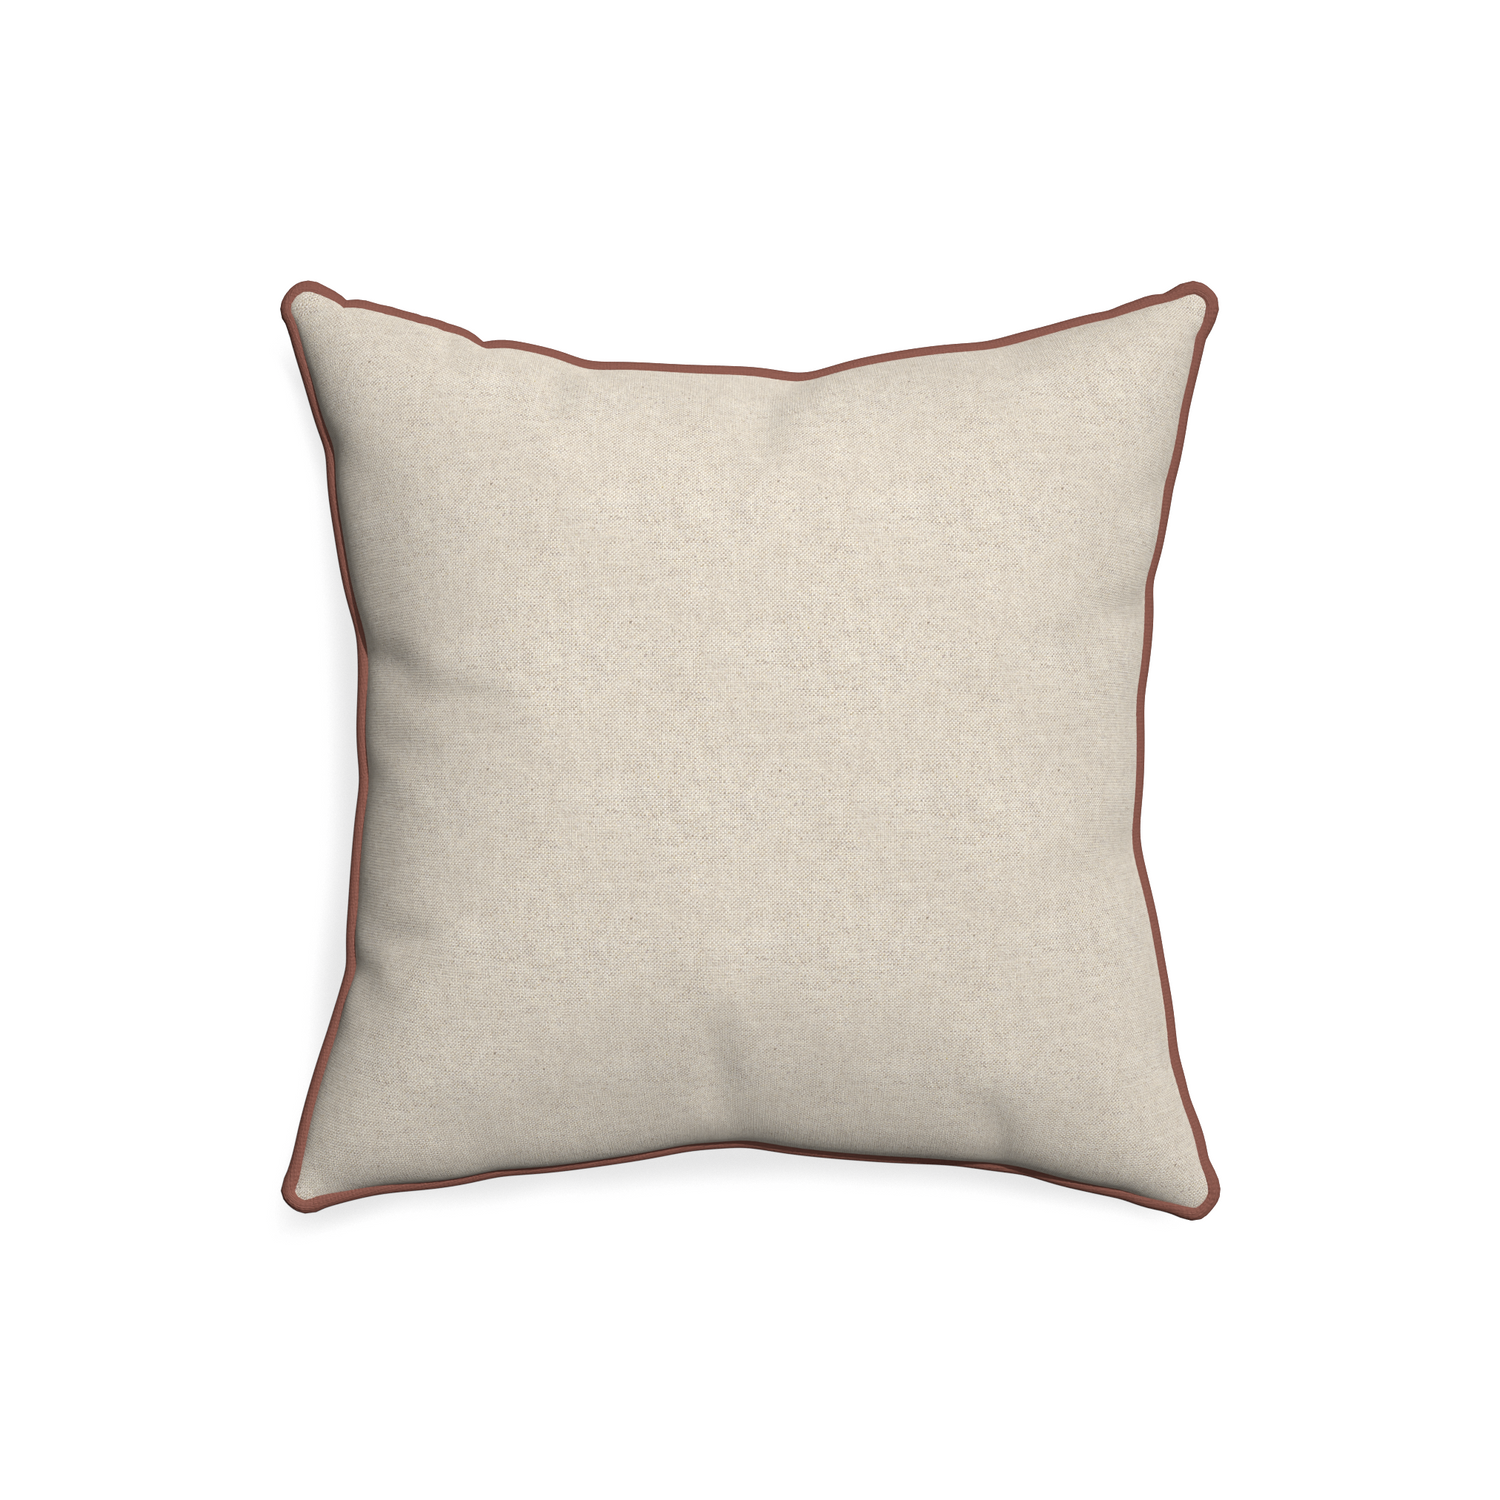 20-square oat custom pillow with w piping on white background